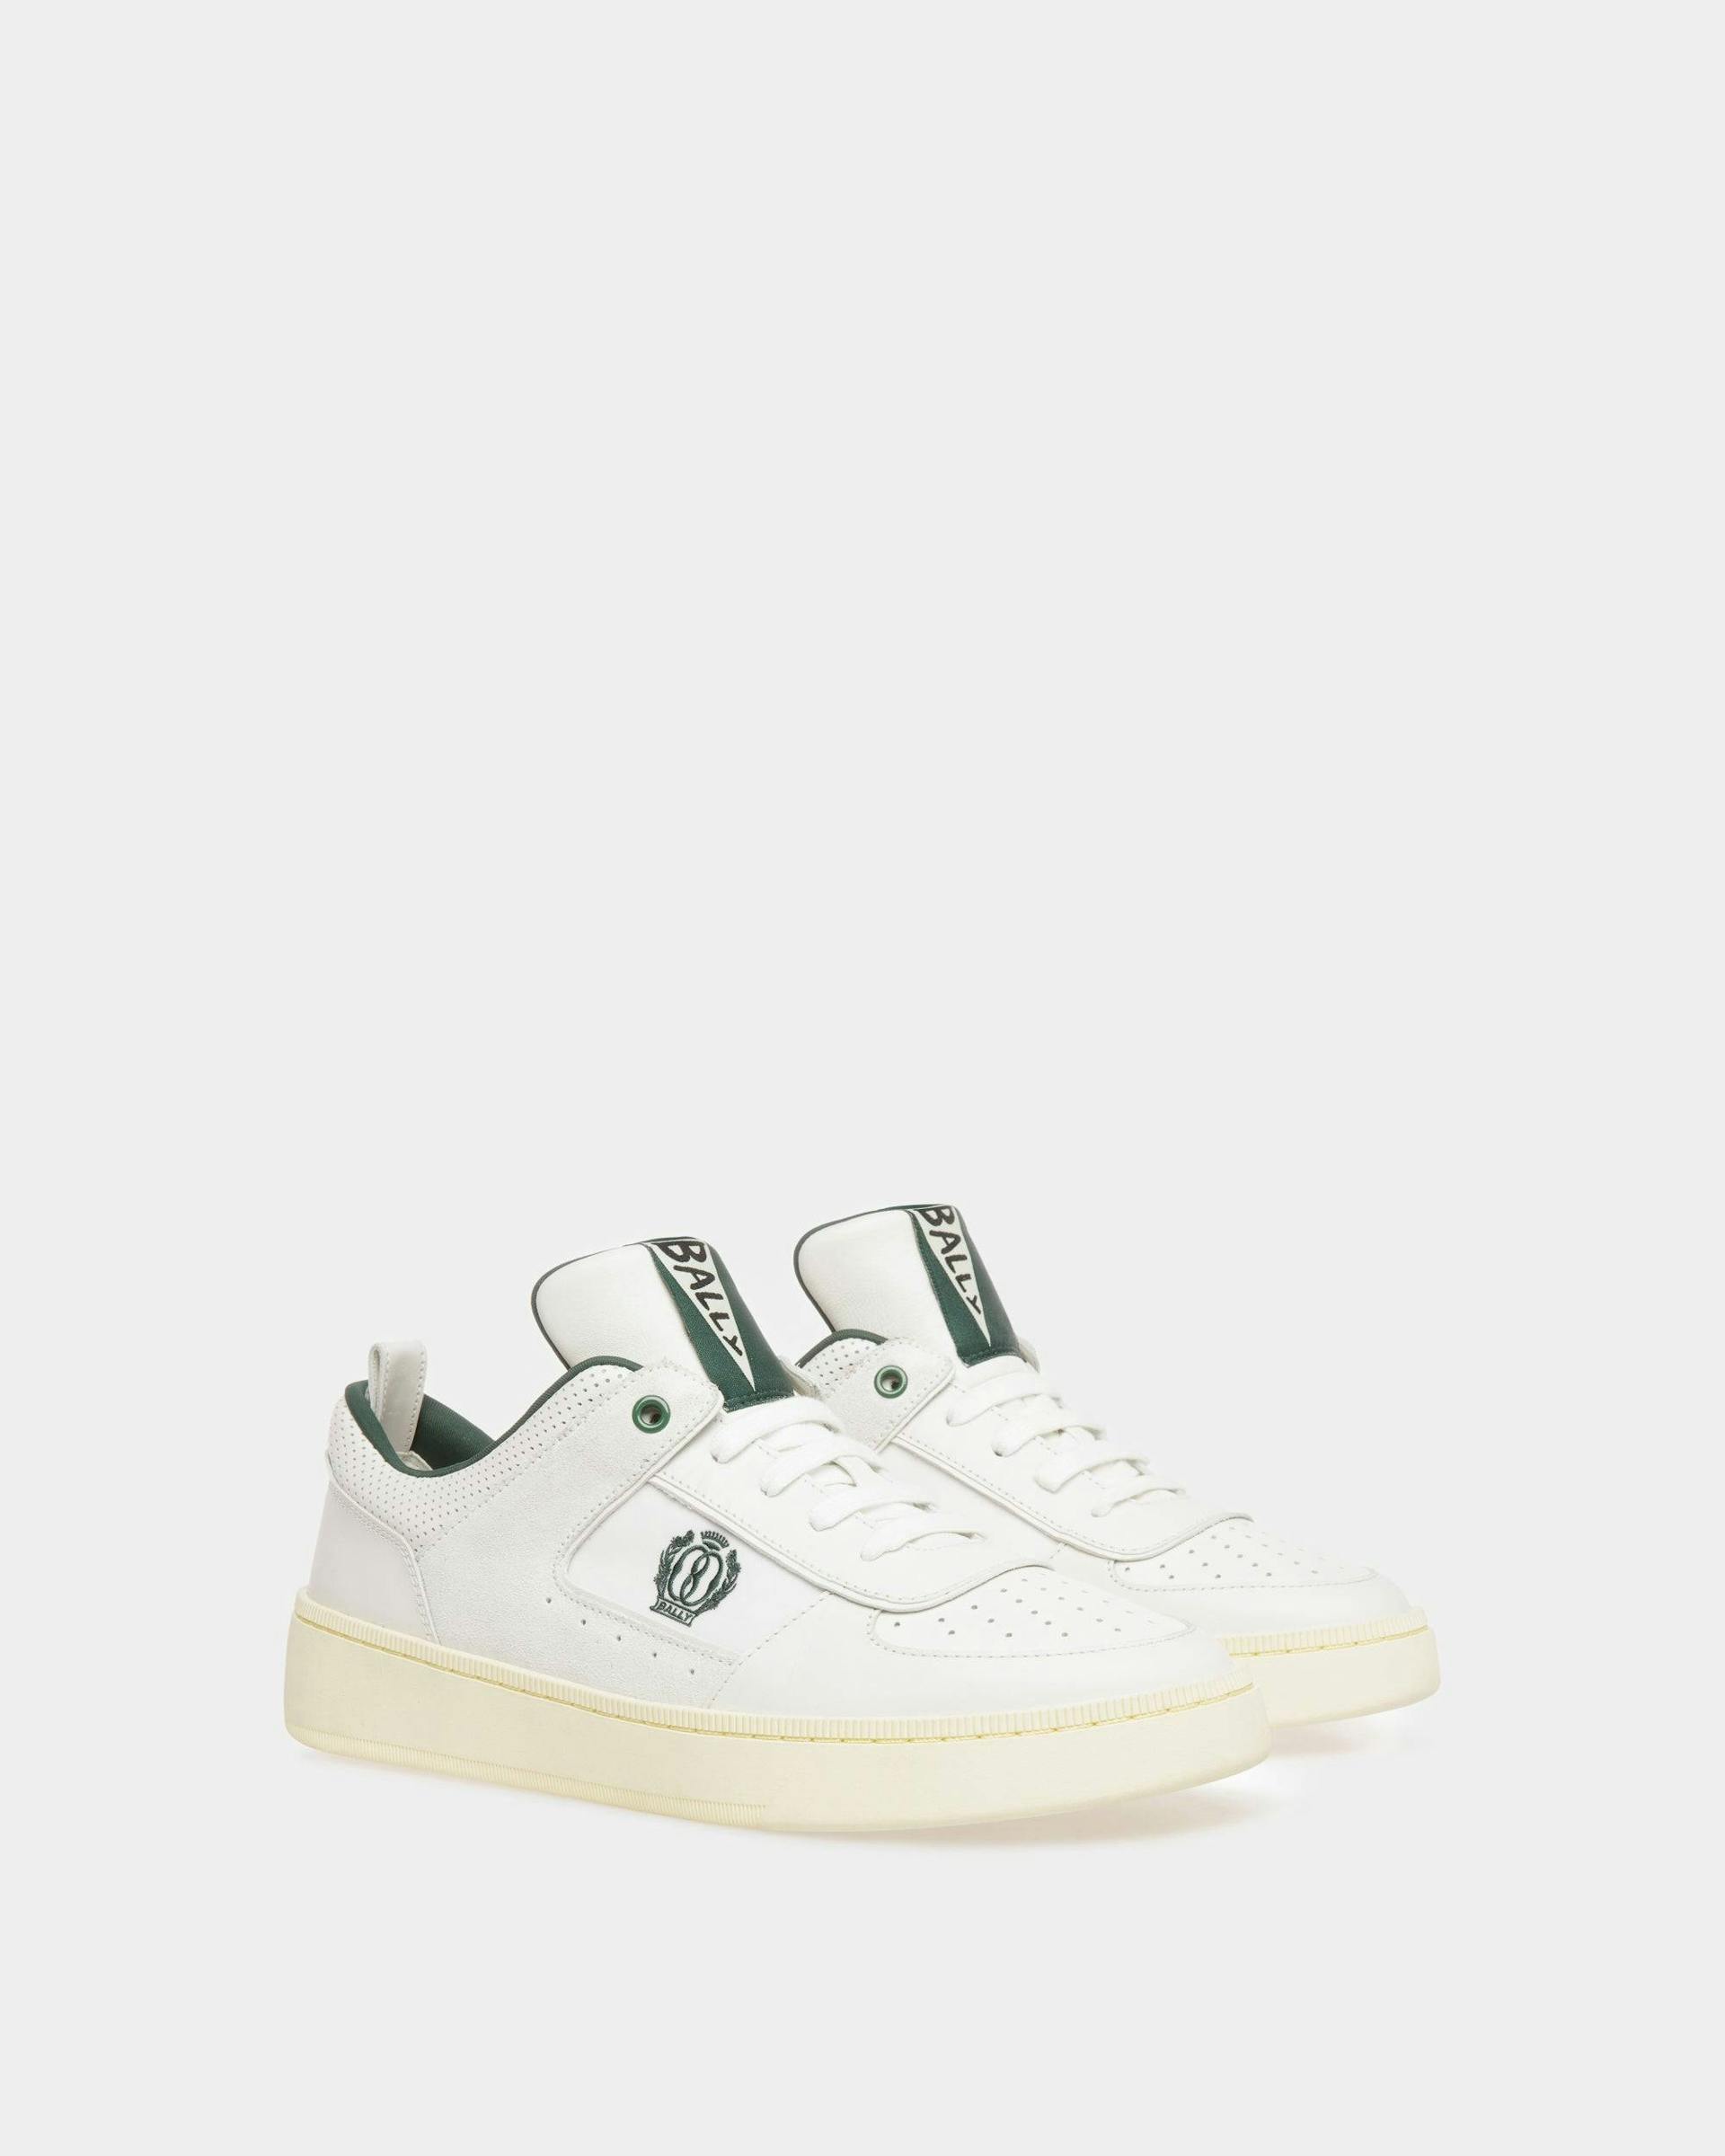 Men's Raise Sneakers In White Leather | Bally | Still Life 3/4 Front